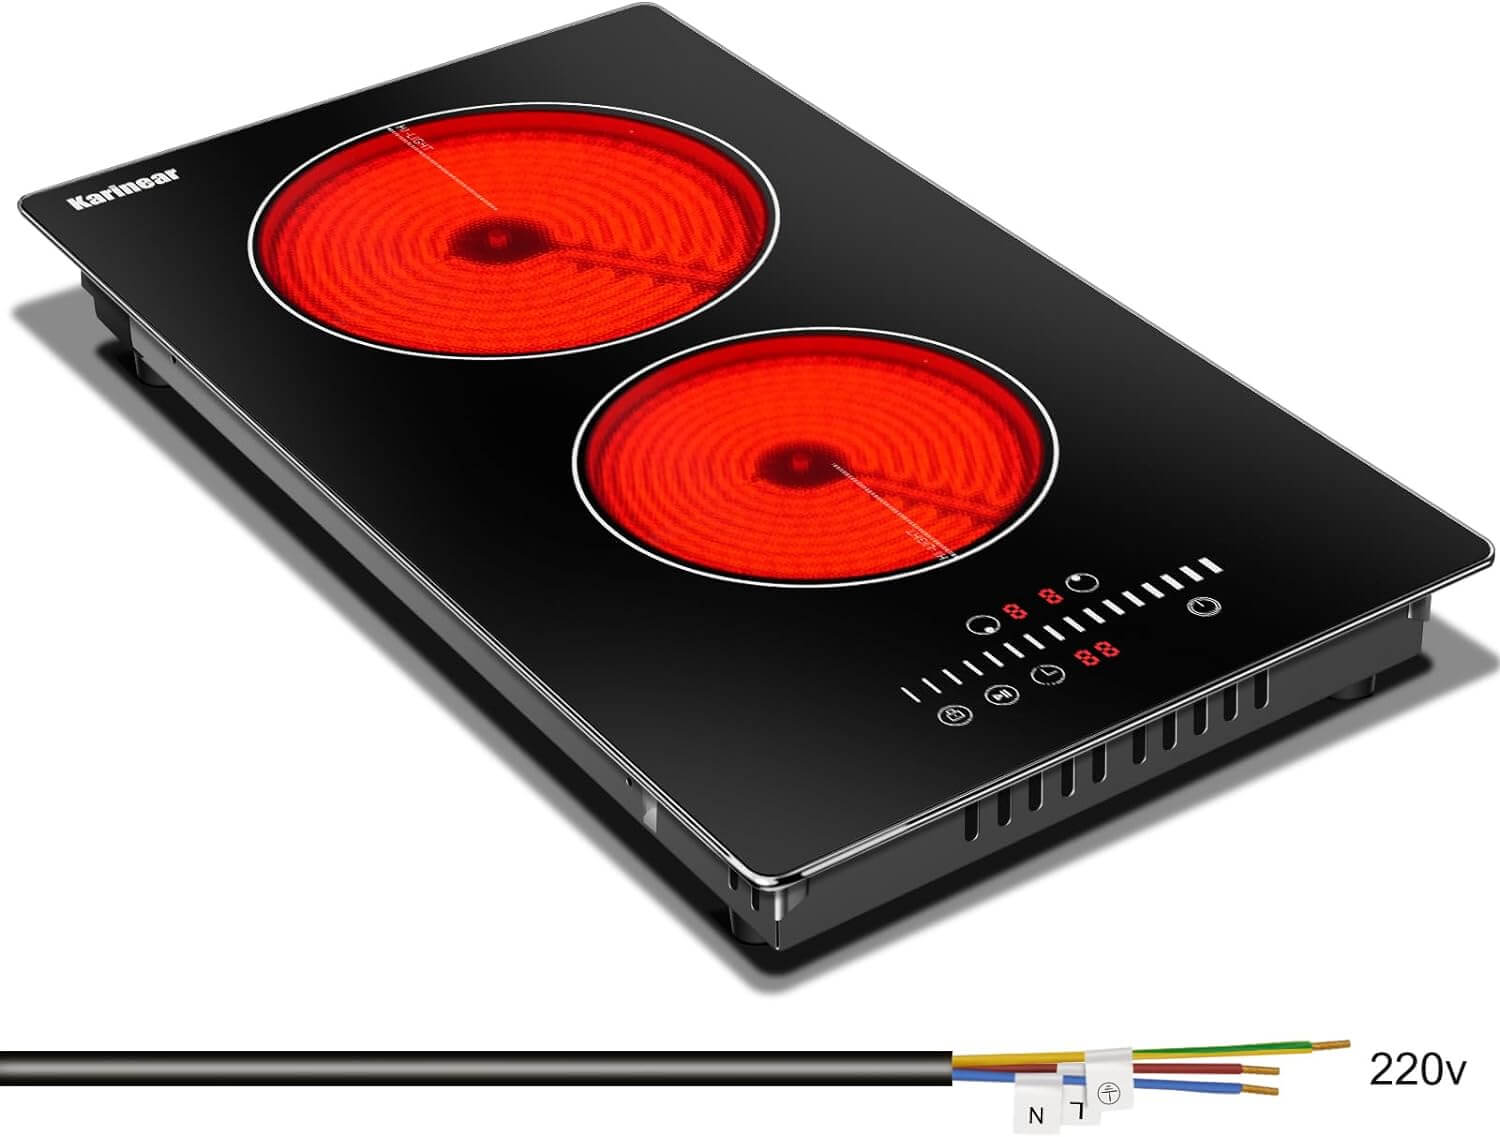 12 Inch 2 Burners Portable Electric Ceramic Cooktop-Sensor Touch Control